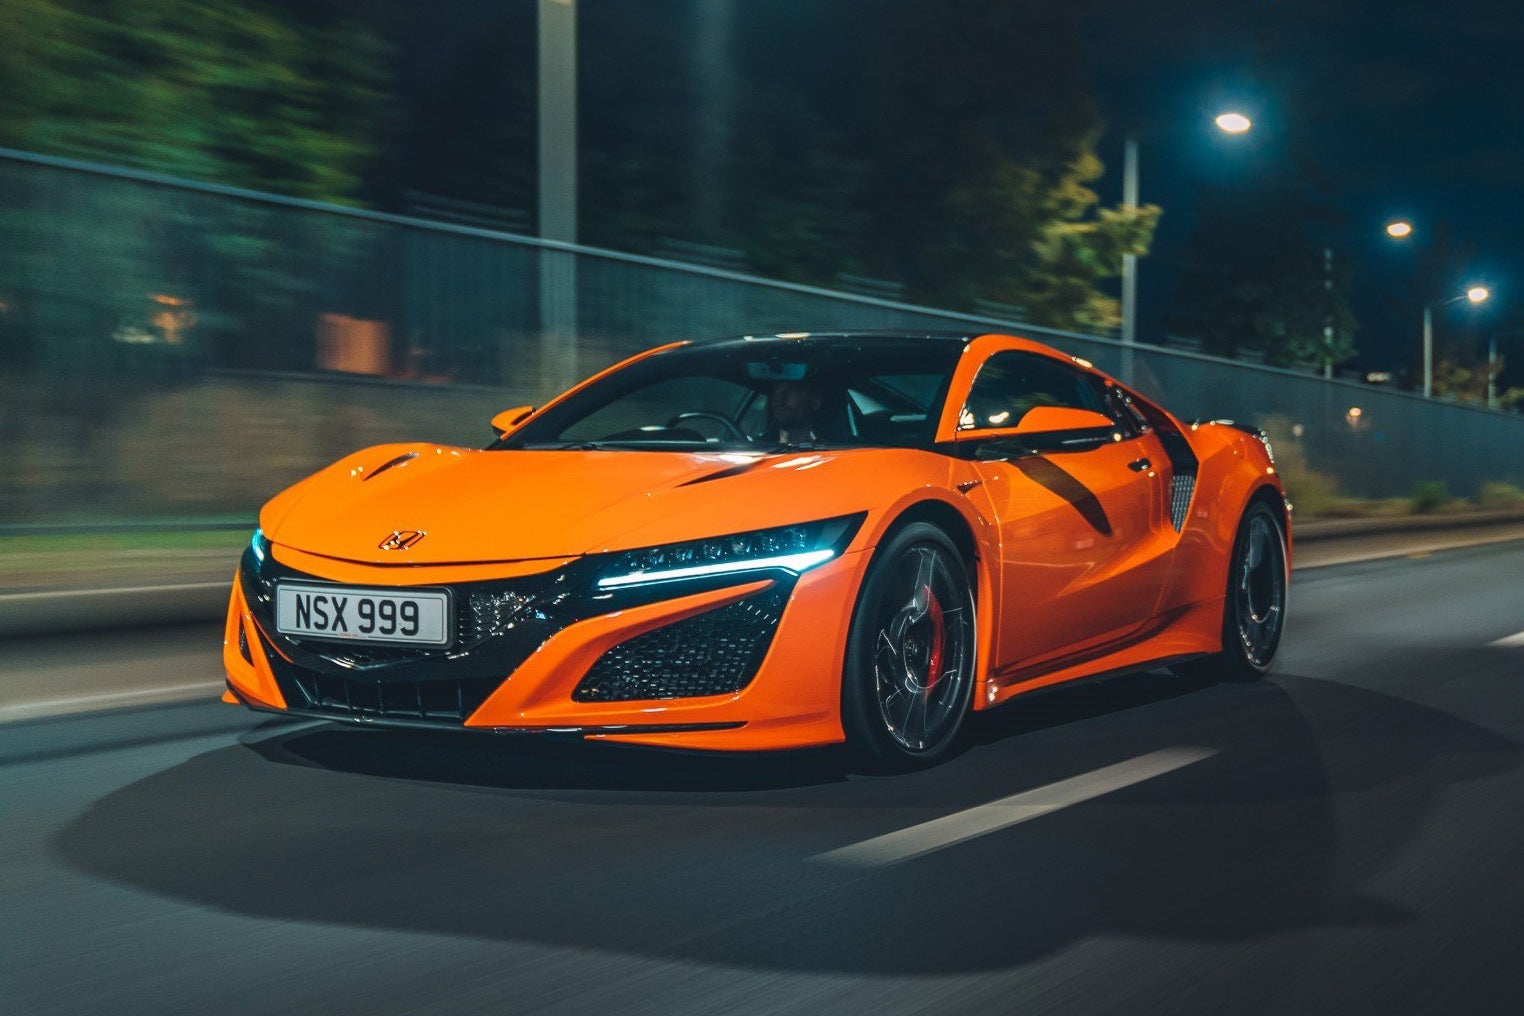 Honda NSX Review 2023: exterior front three quarter photo of the Honda NSX on the road